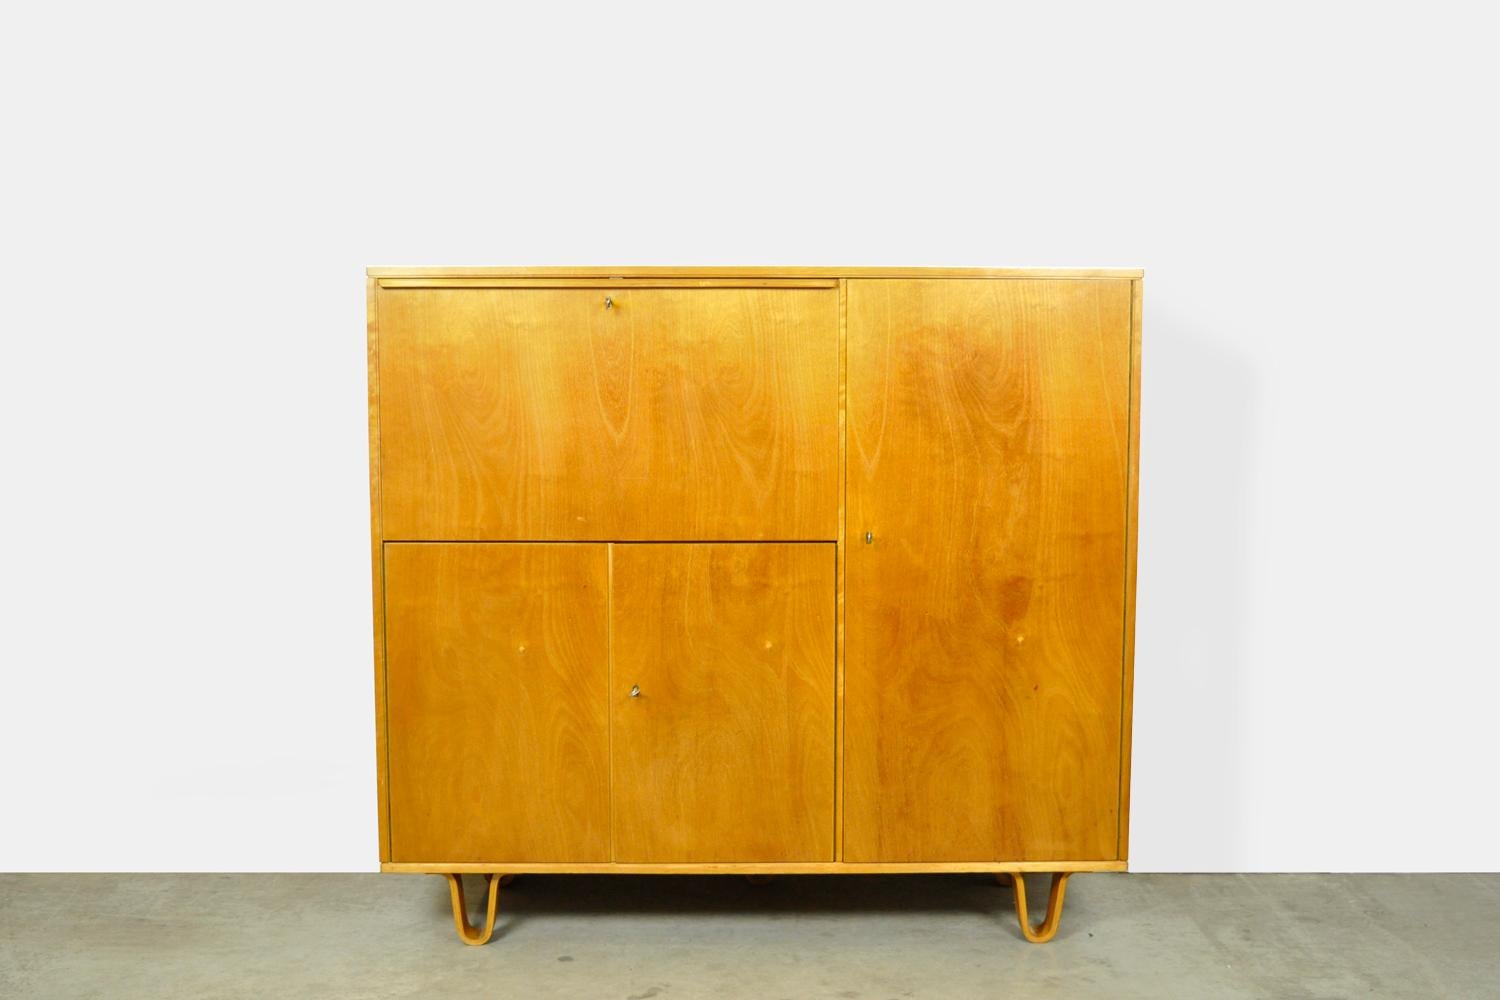 Vintage Birch series sideboard CB01, designed by Cees Braakman for Pastoe, 1950s. The cabinet has a birch veneer finish, stands on the characteristic plywood loop legs and has the well-known anti-dust drawers. The vintage furniture belongs to the